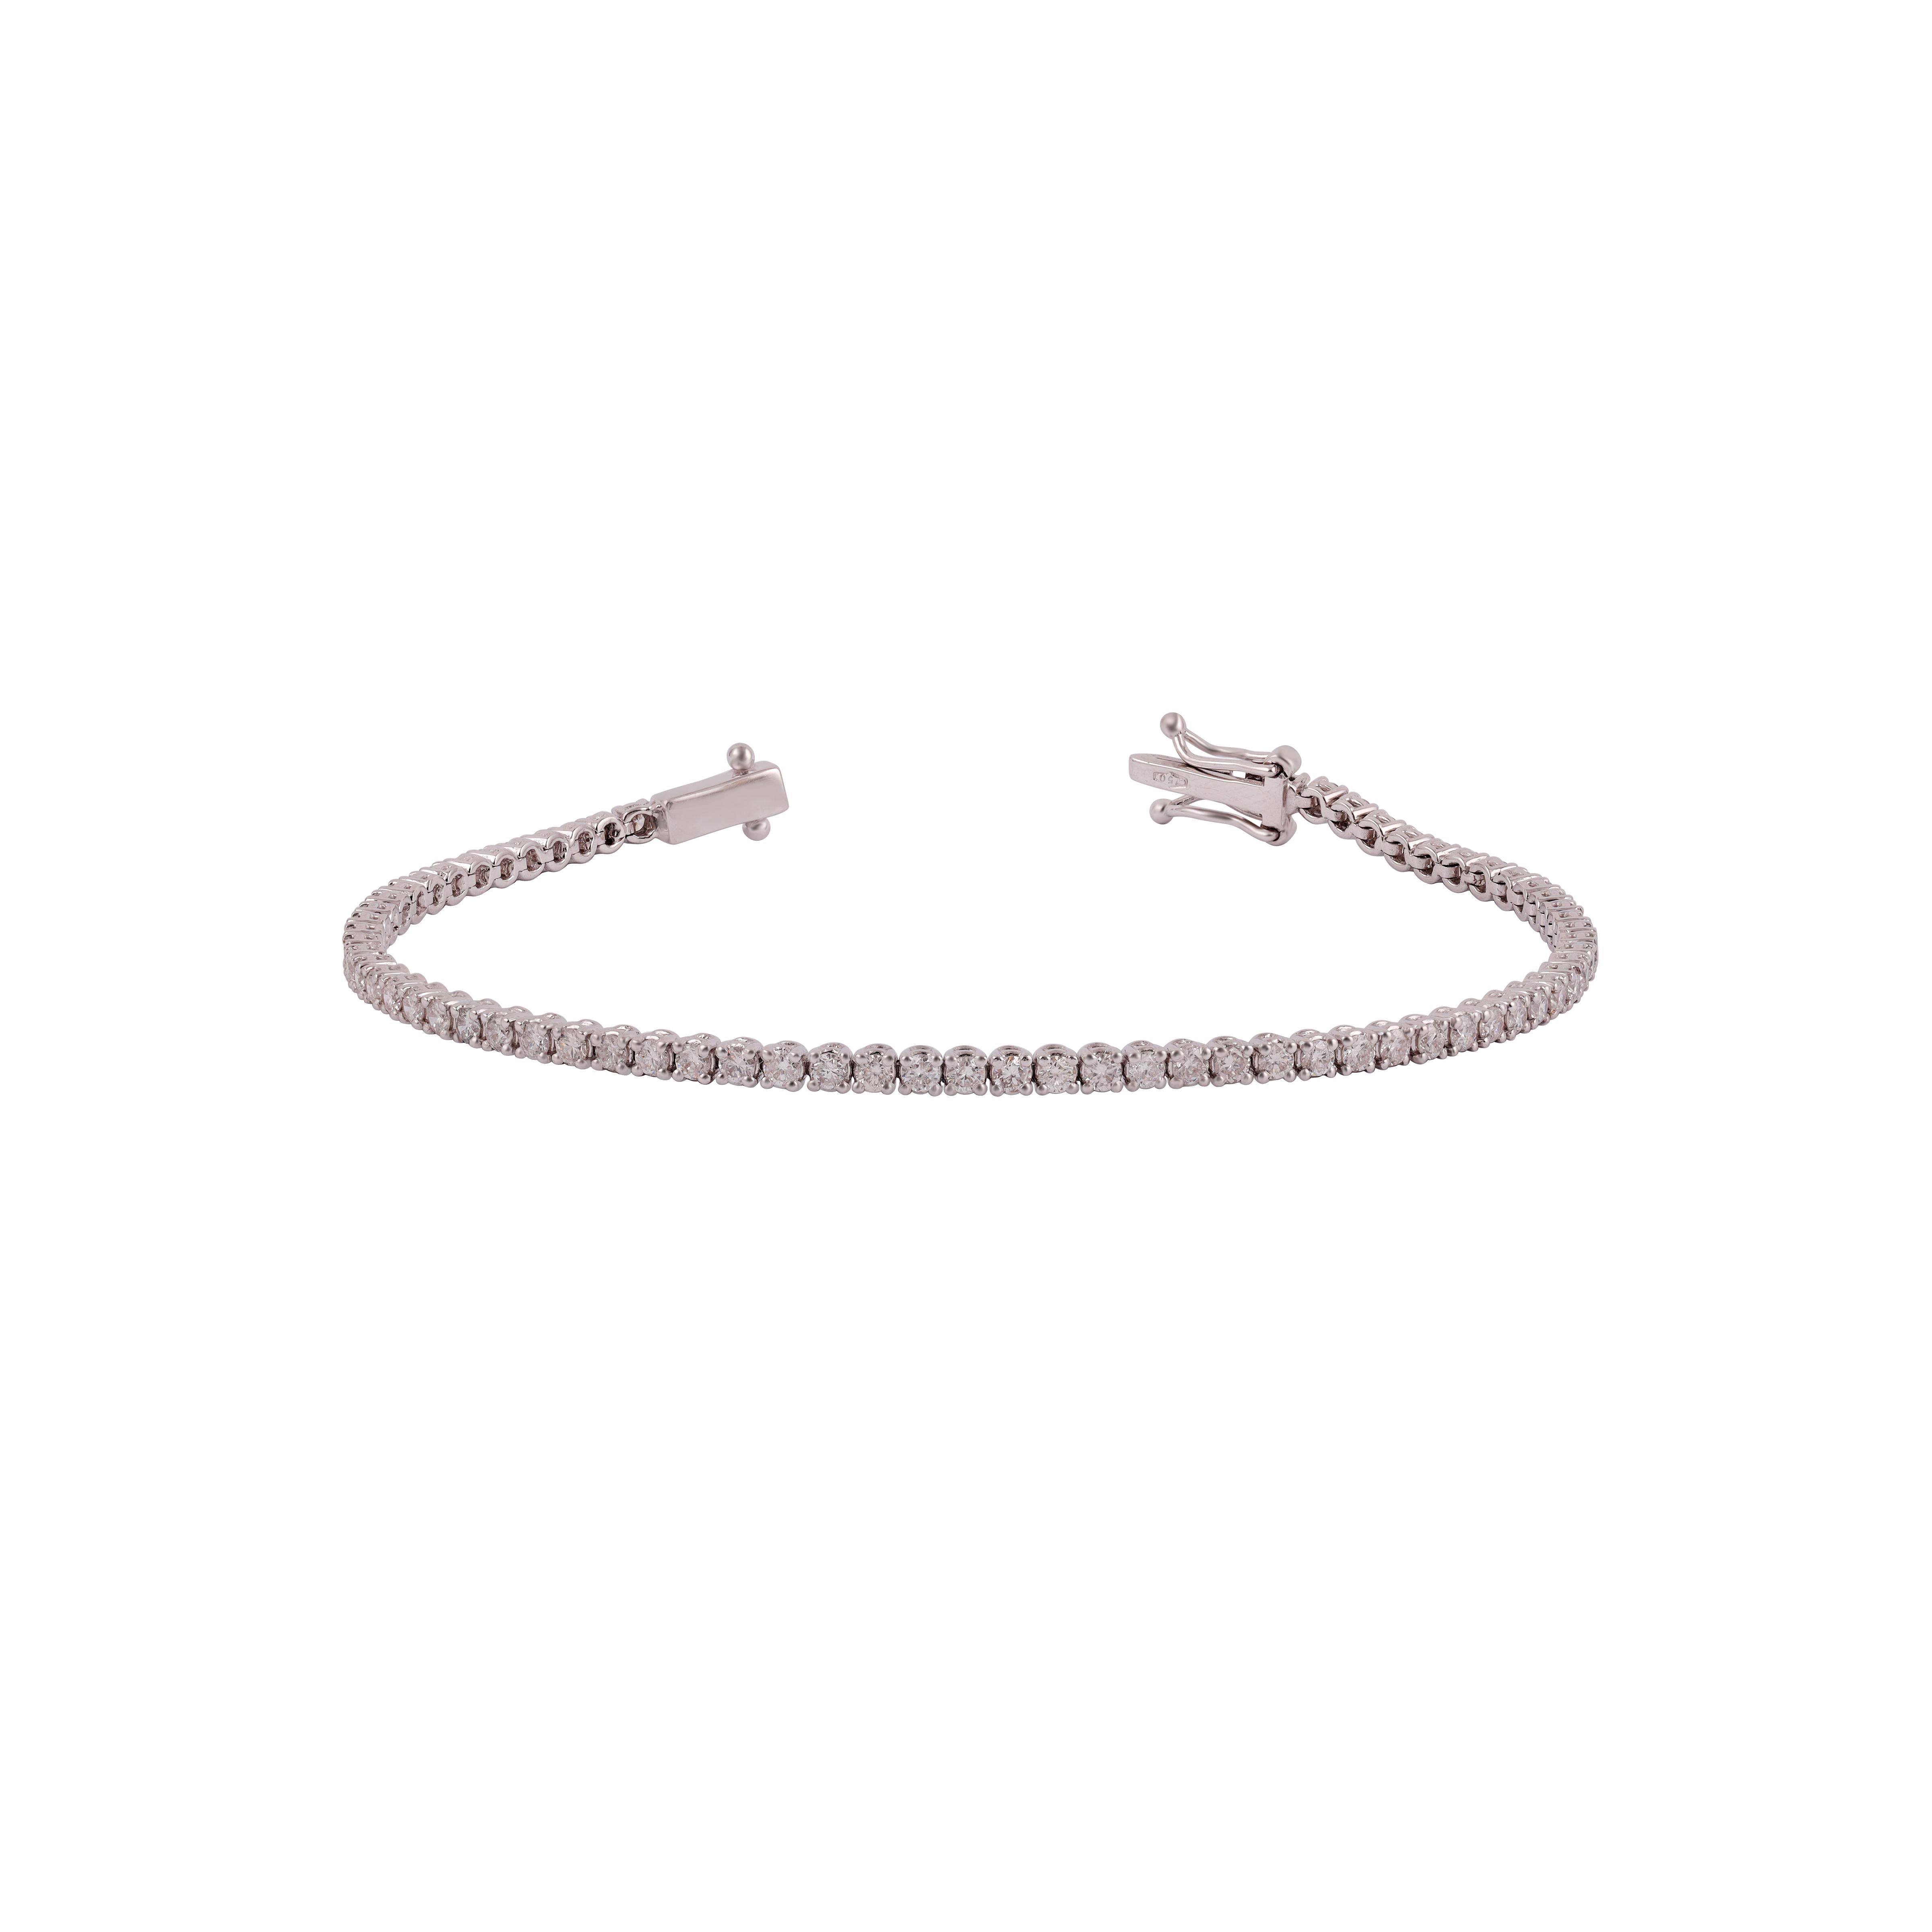 Have you always wanted a tennis bracelet? This is one that you could wear everyday, all day, and even to bed! This 2.16 carat total weight diamond tennis bracelet is made really well with well constructed links and nice secure prongs that hold the